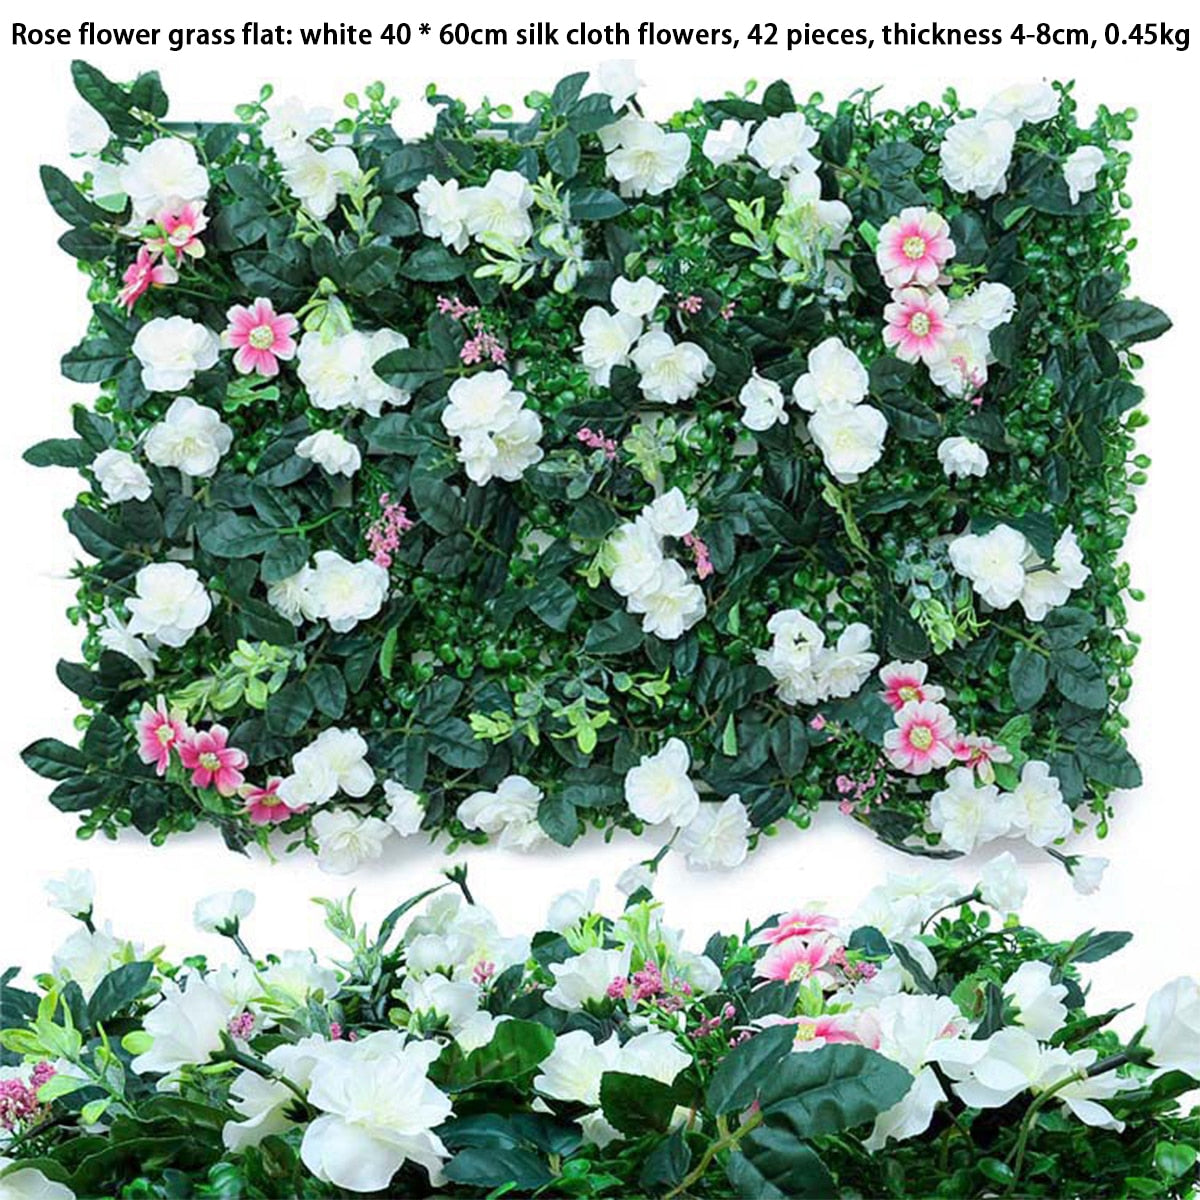 Artificial Plant Wall Reusable Grass Backdrop Wall Panel Plastic Garden Grass Flower Wall Fake Green Plant Hanging Fencing Décor - youronestopstore23